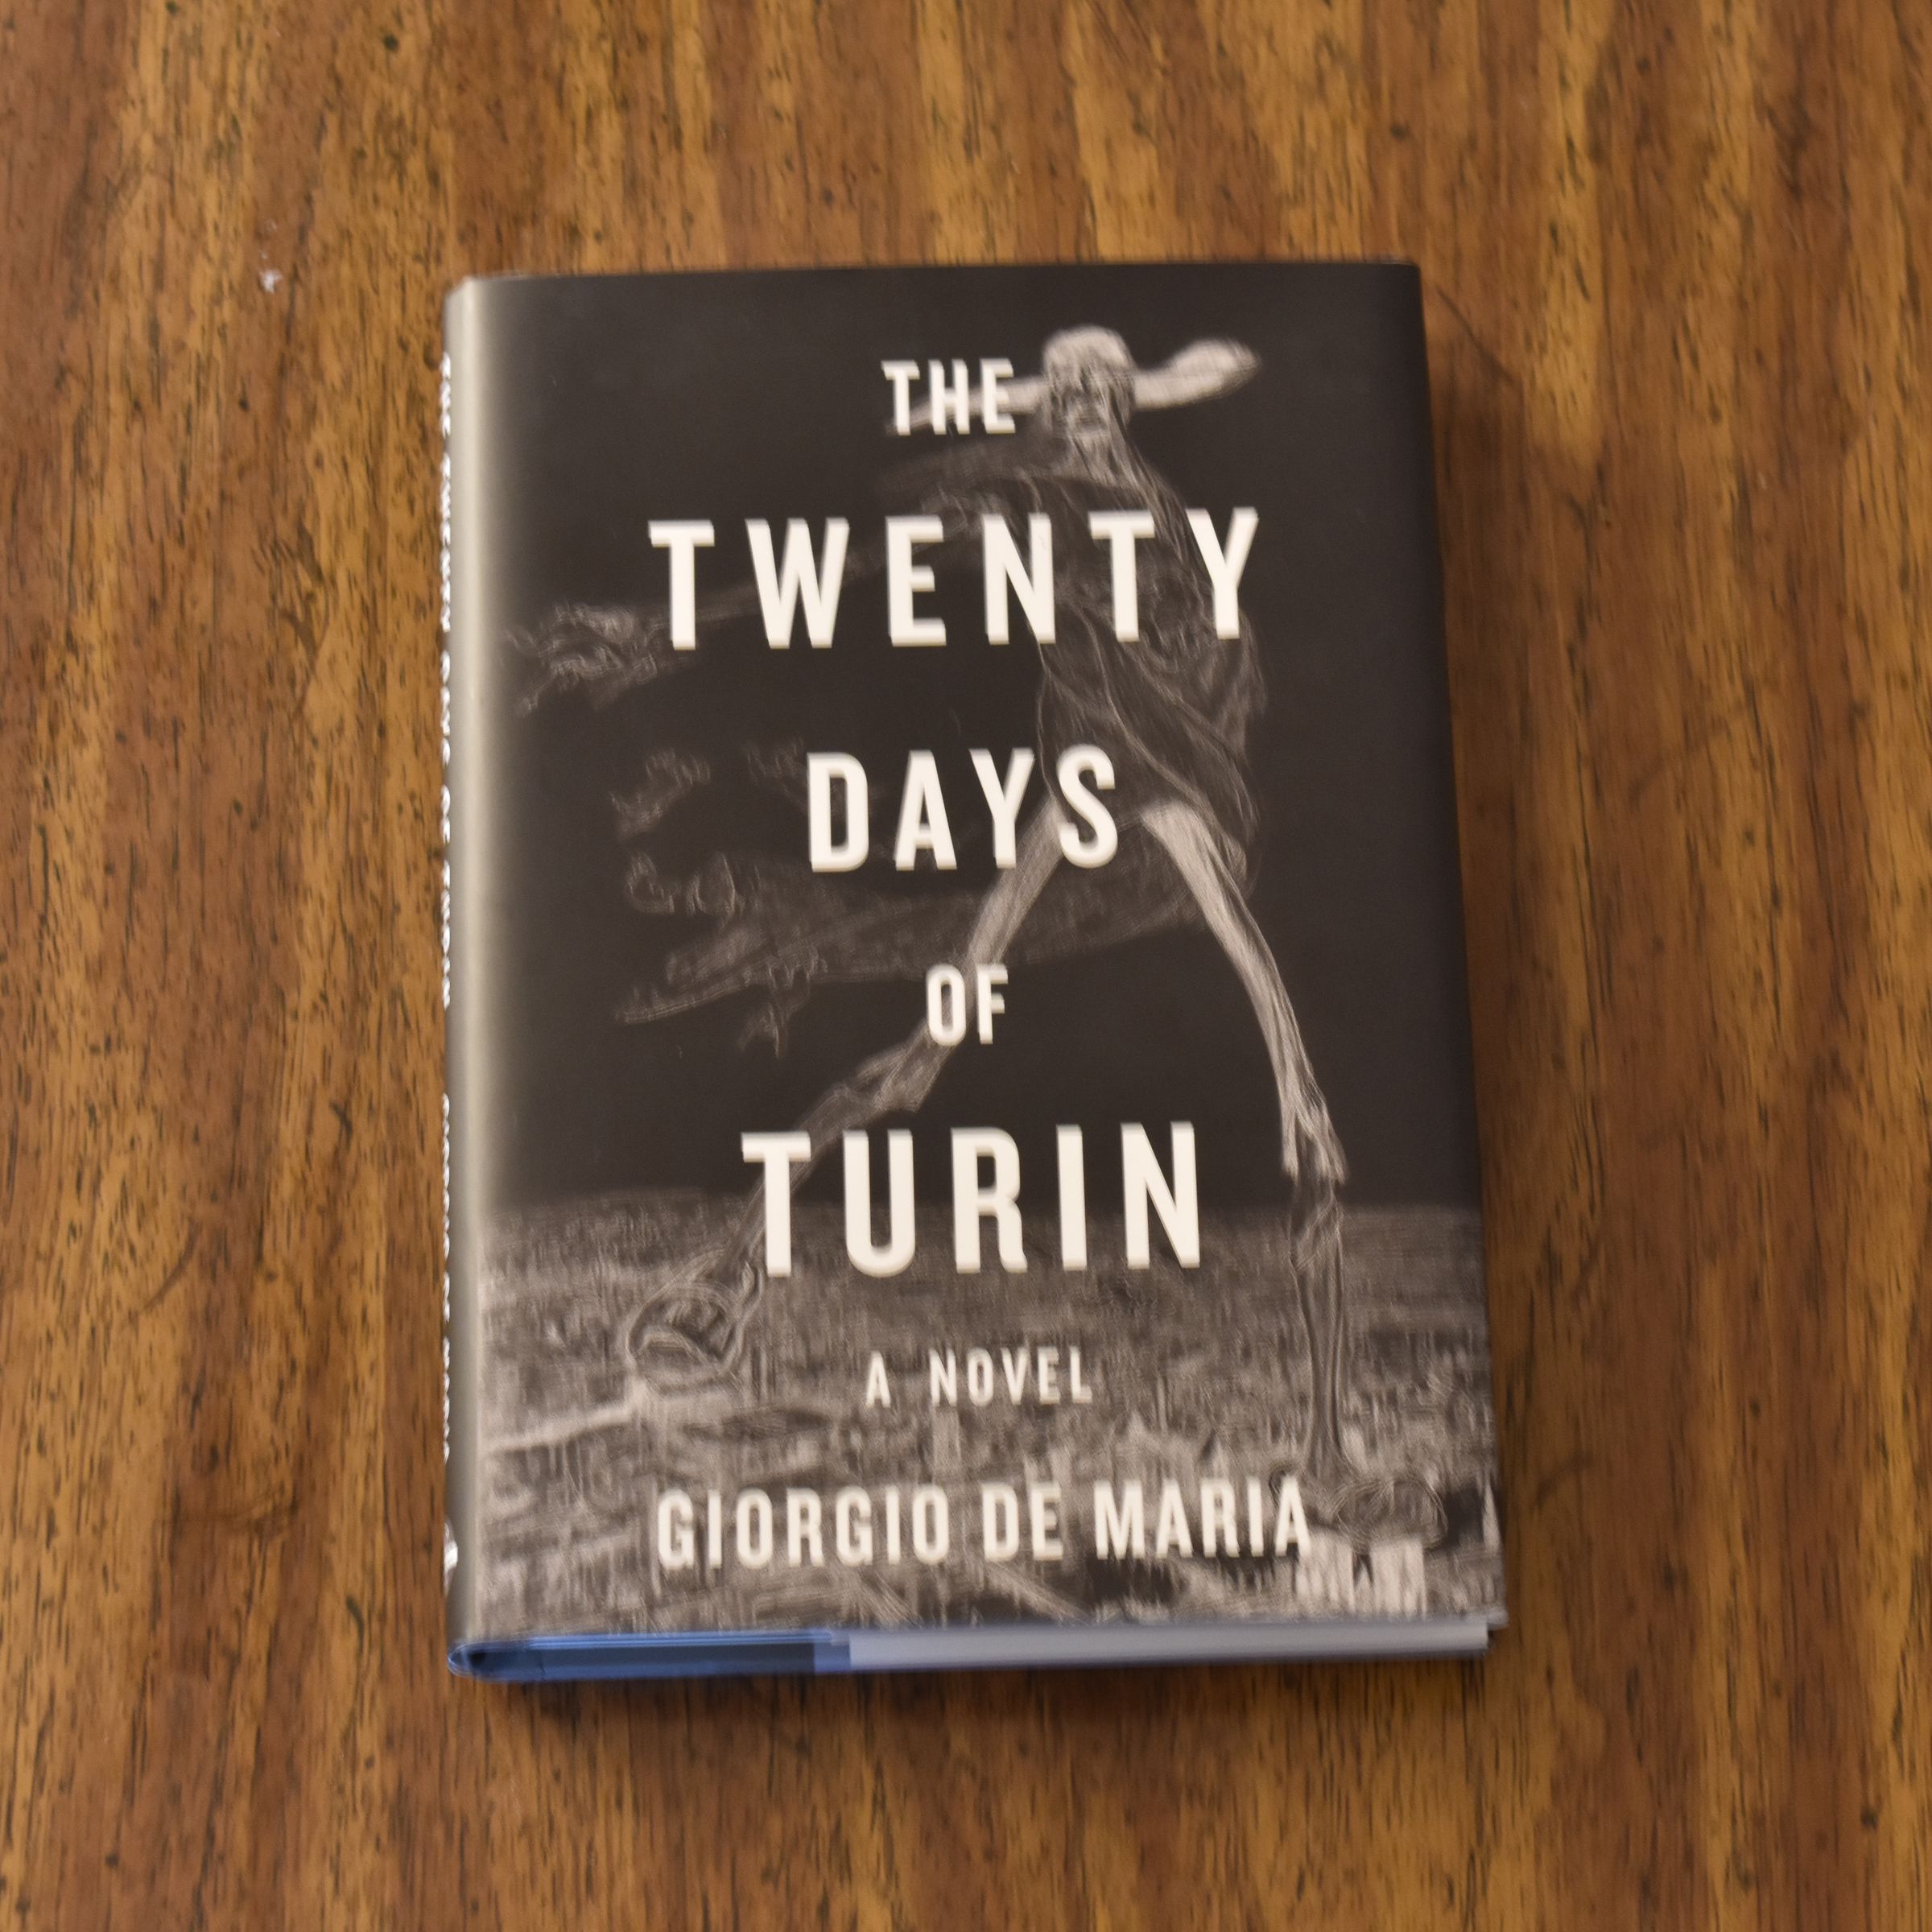 A photograph of the cover of The Twenty Days of Turin